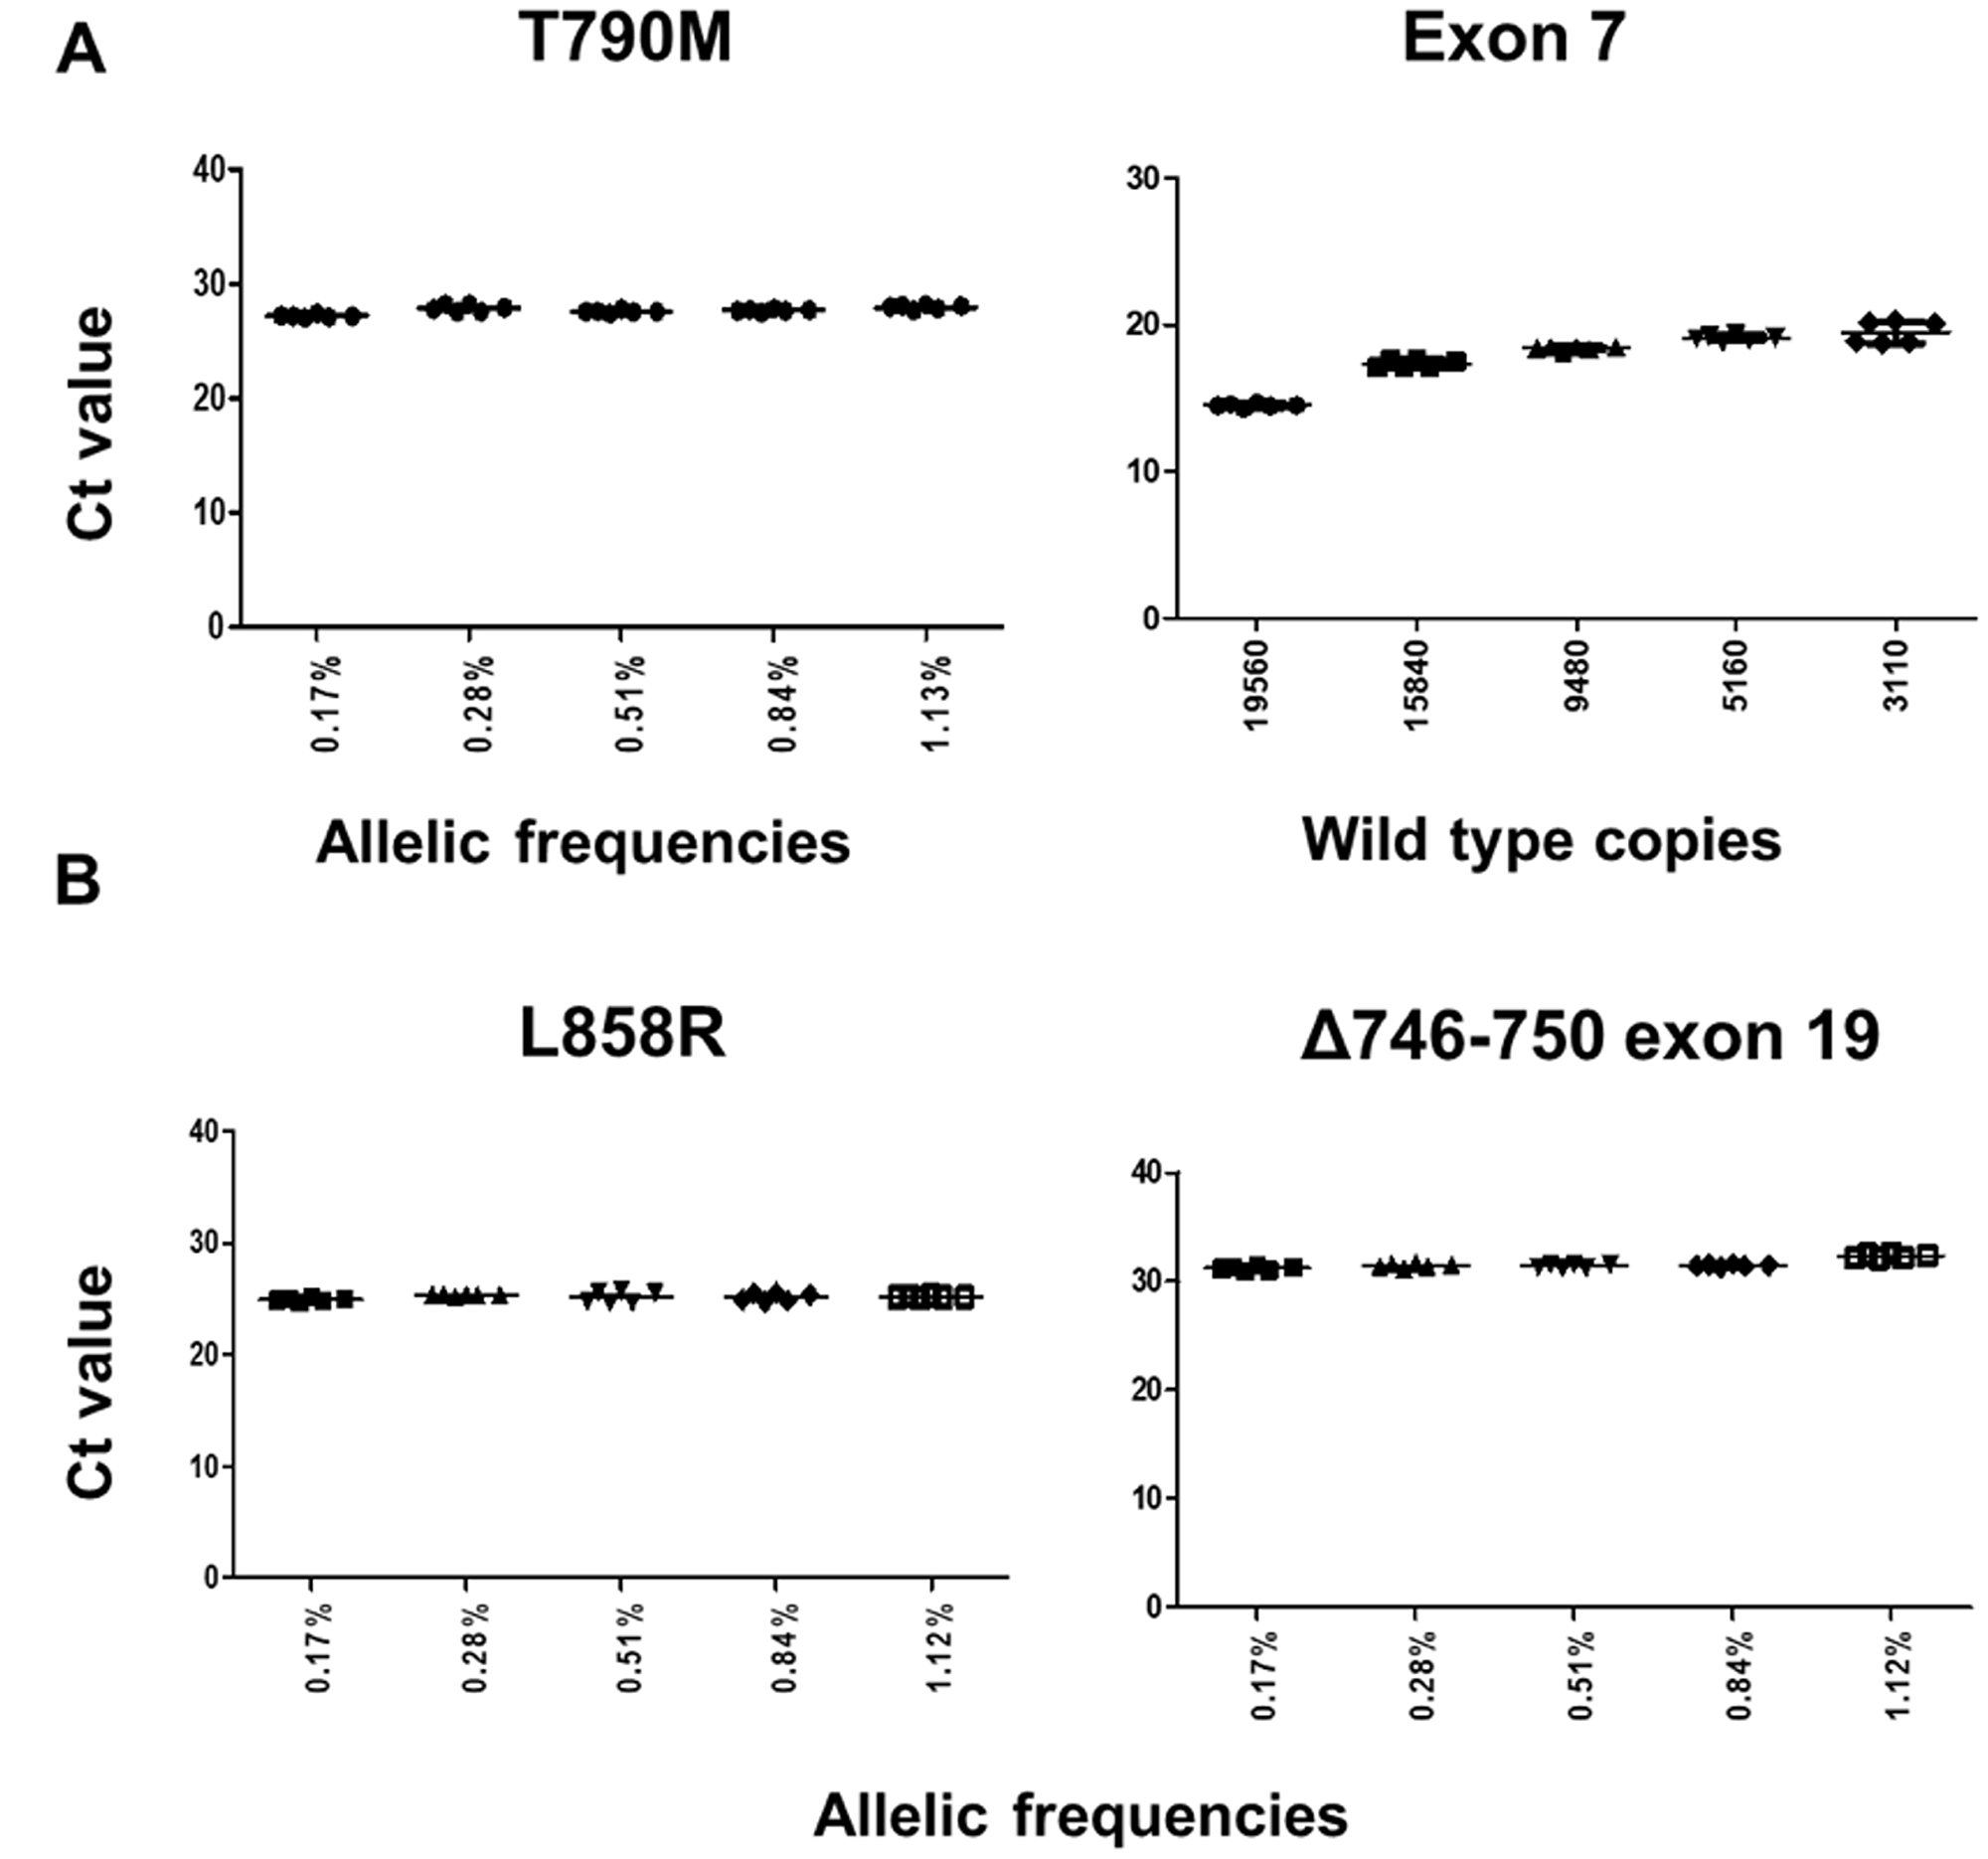 Assay robustness on gDNA admixtures for T790M, L858R and exon 19 deletion (Δ746-750).